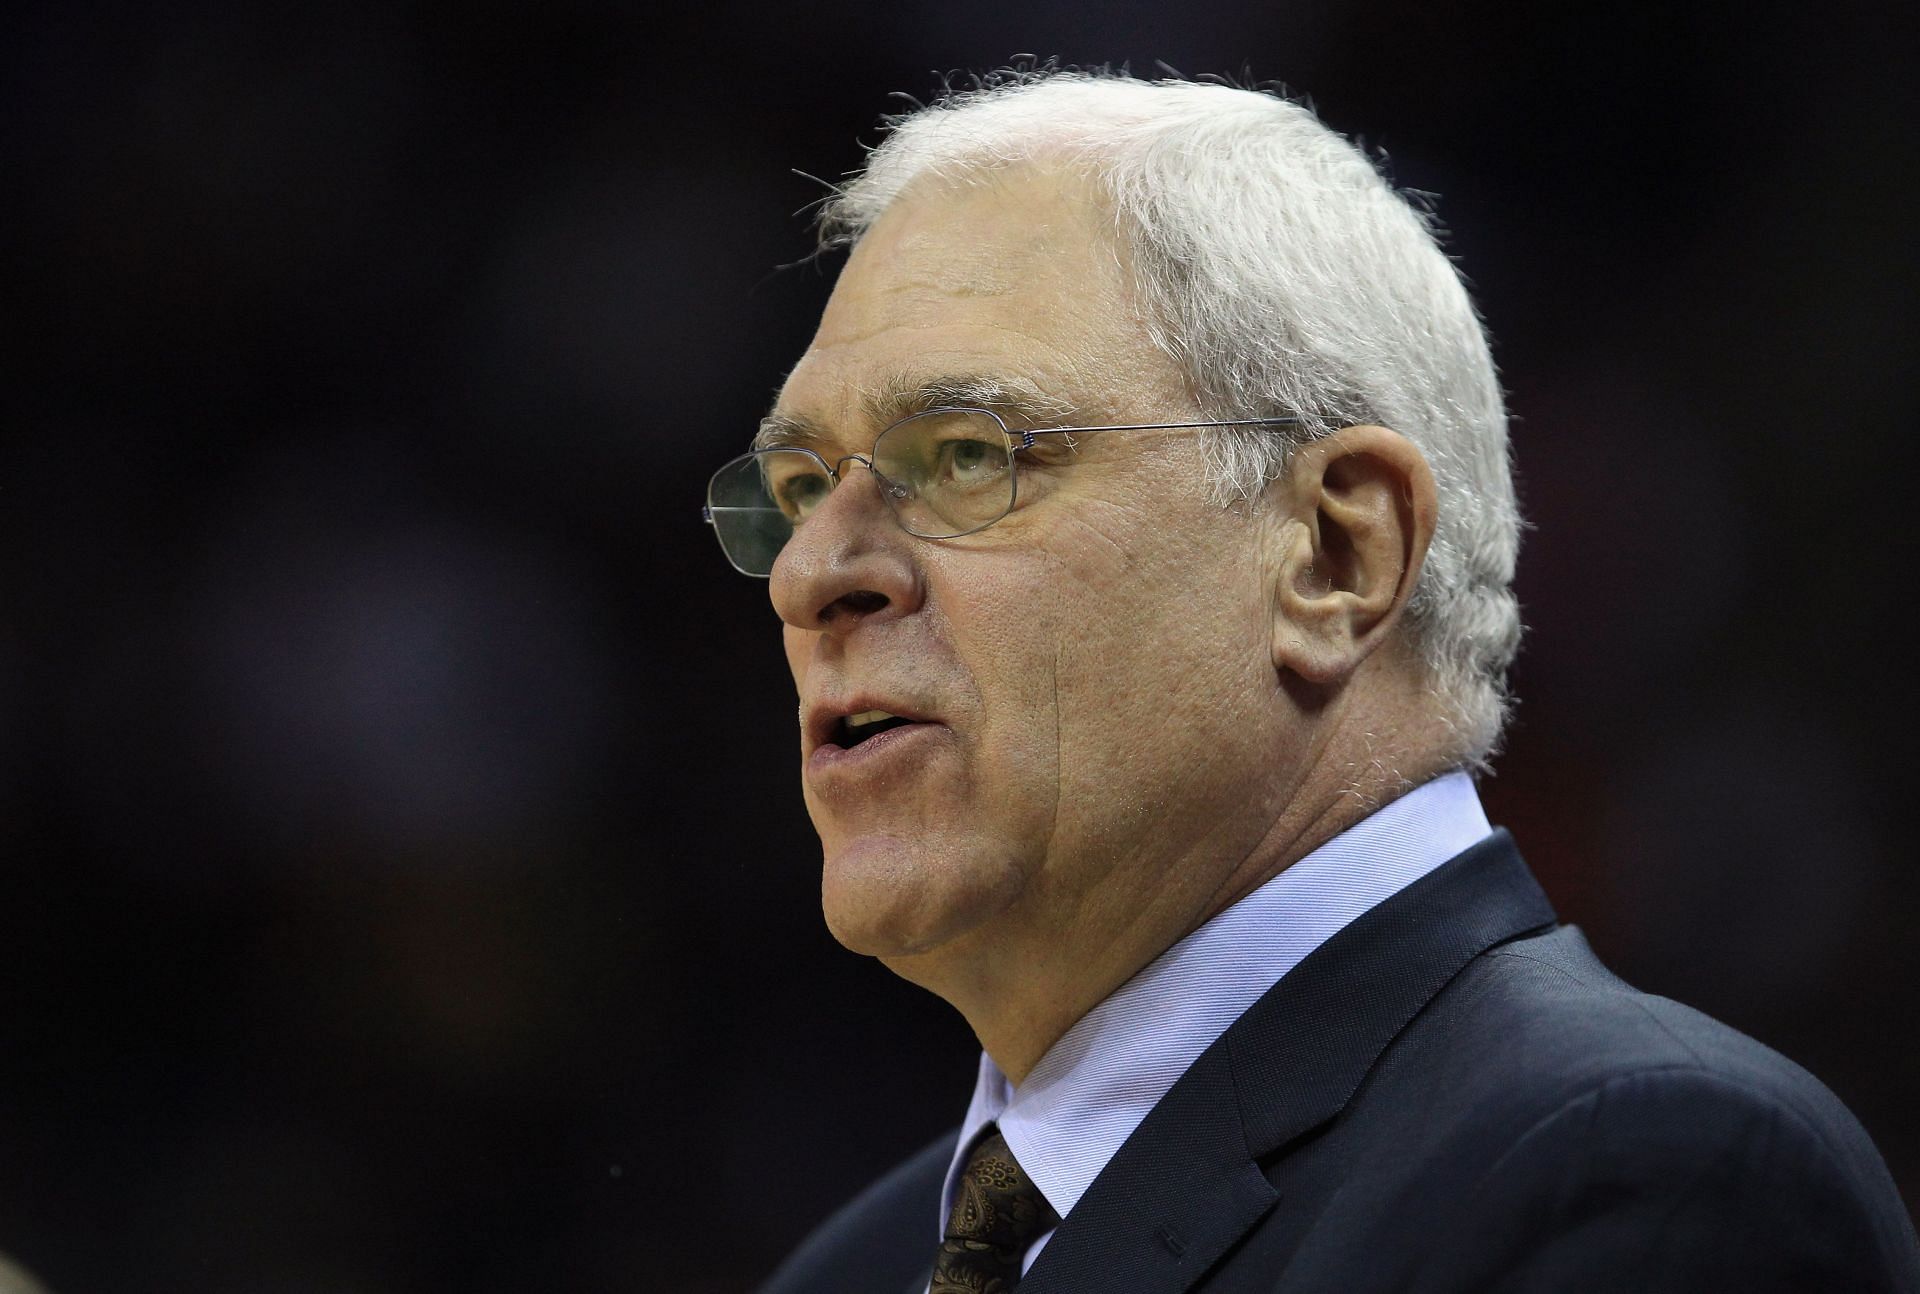 Phil Jackson has been long associated with the LA Lakers, and has won 5 championships as their head coach.